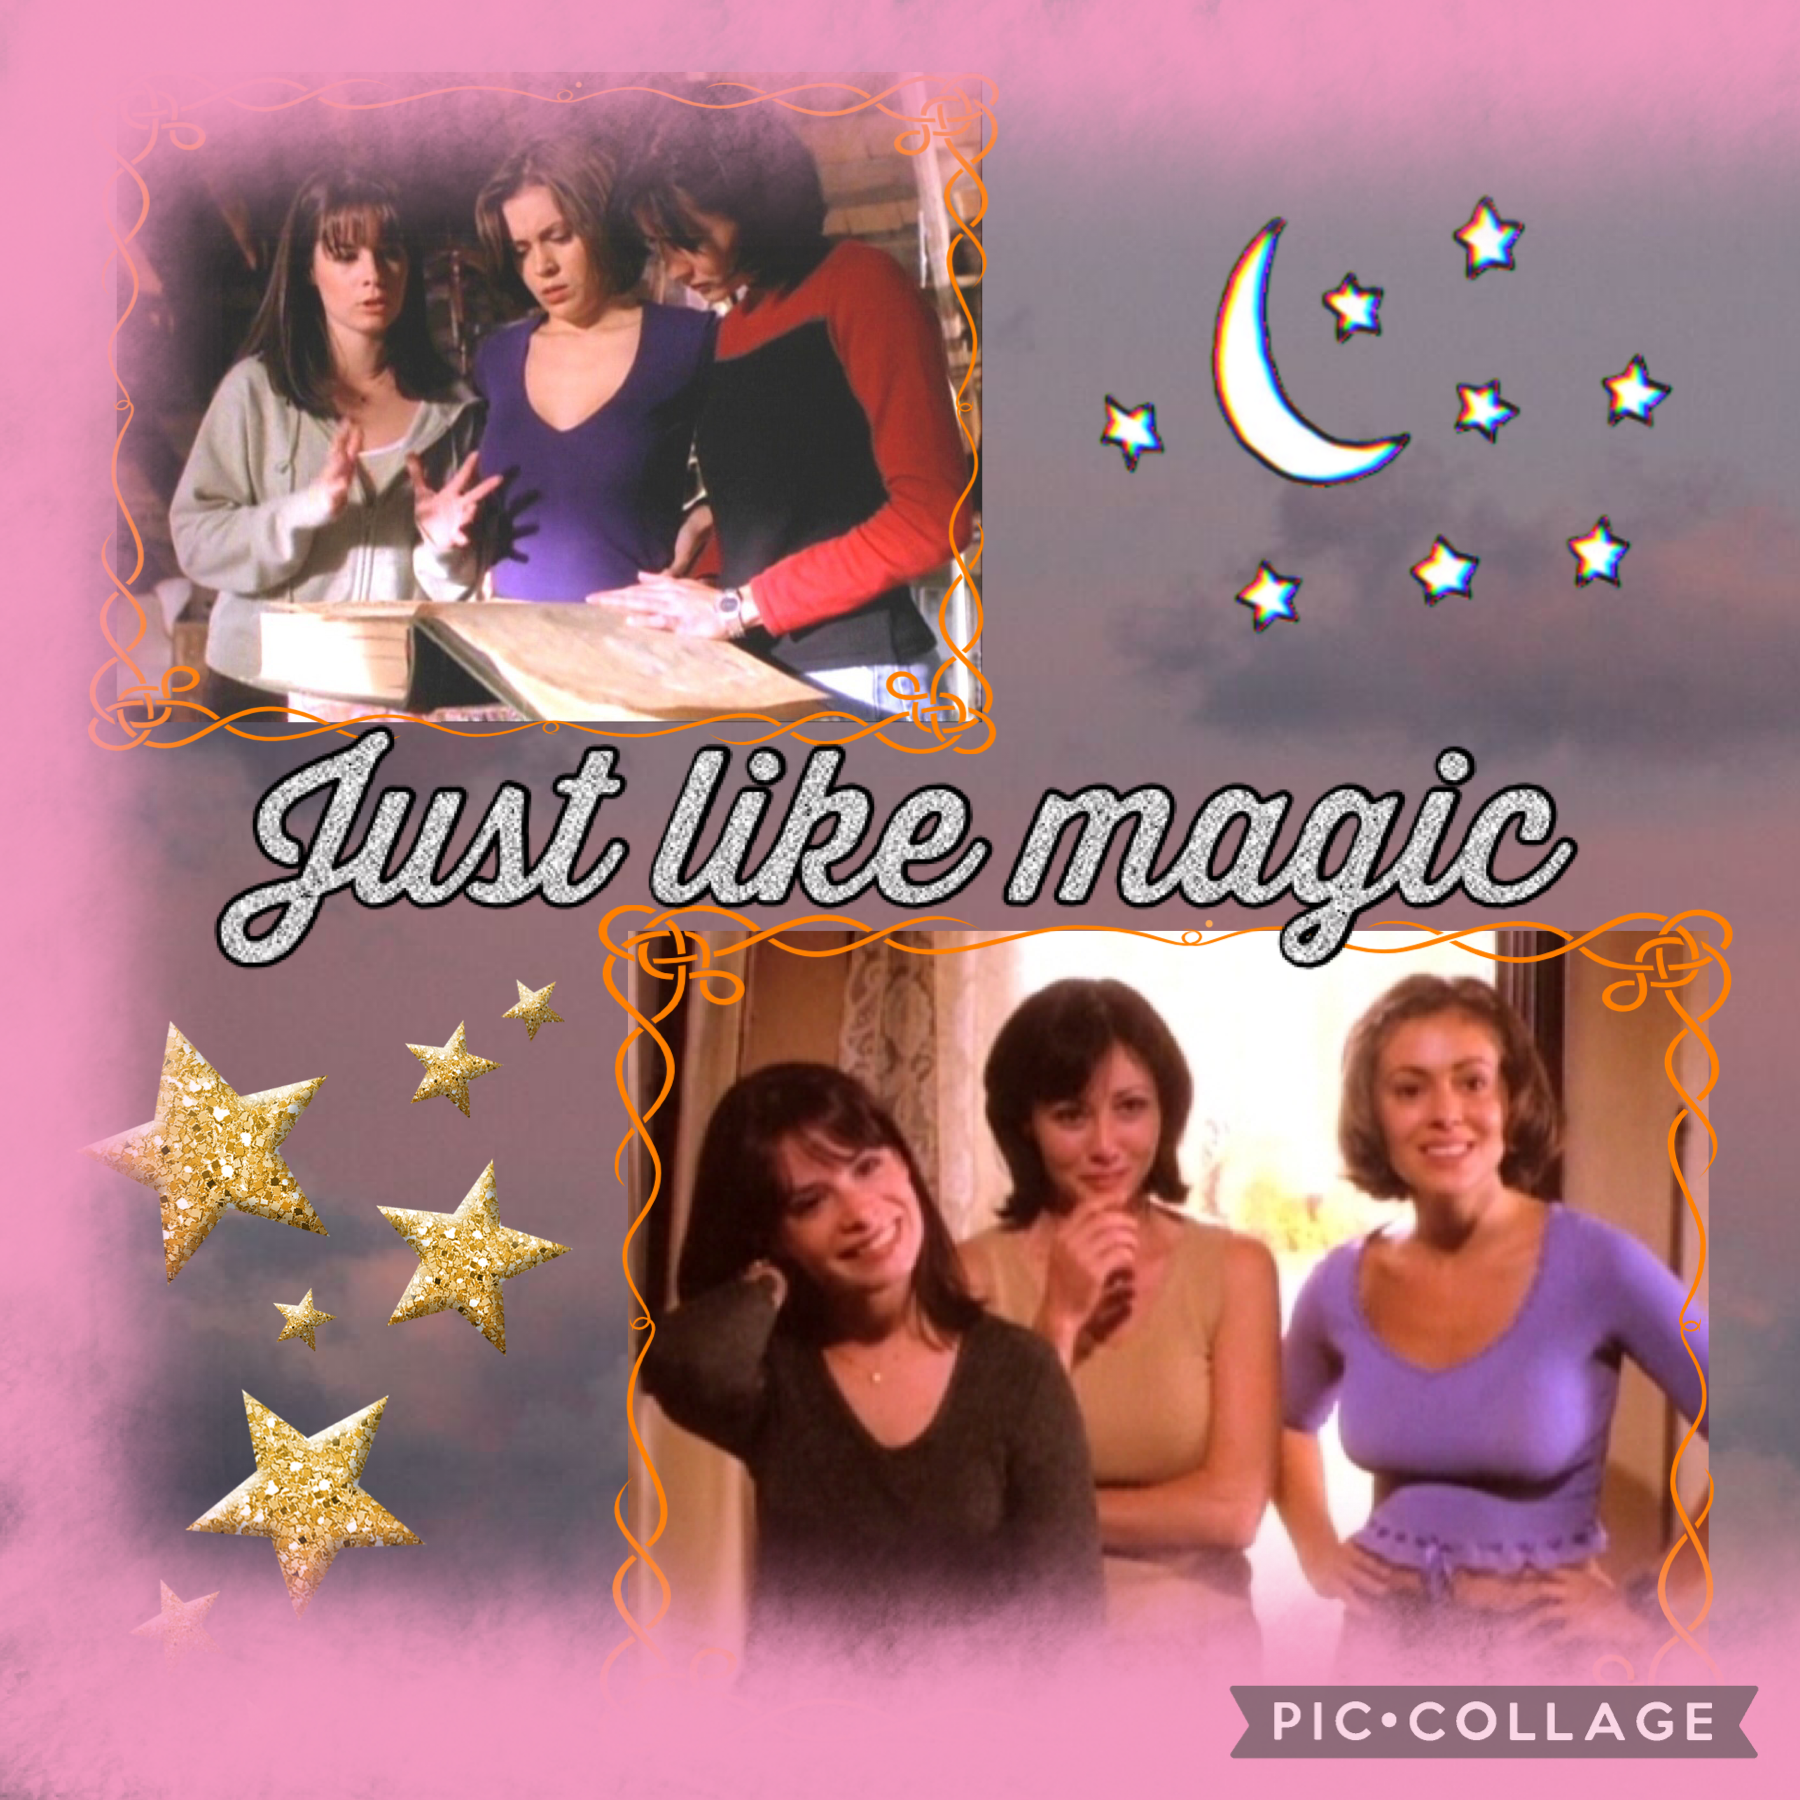 16.3.22 Charmed aesthetic collage inspired by Moonlightcococa 